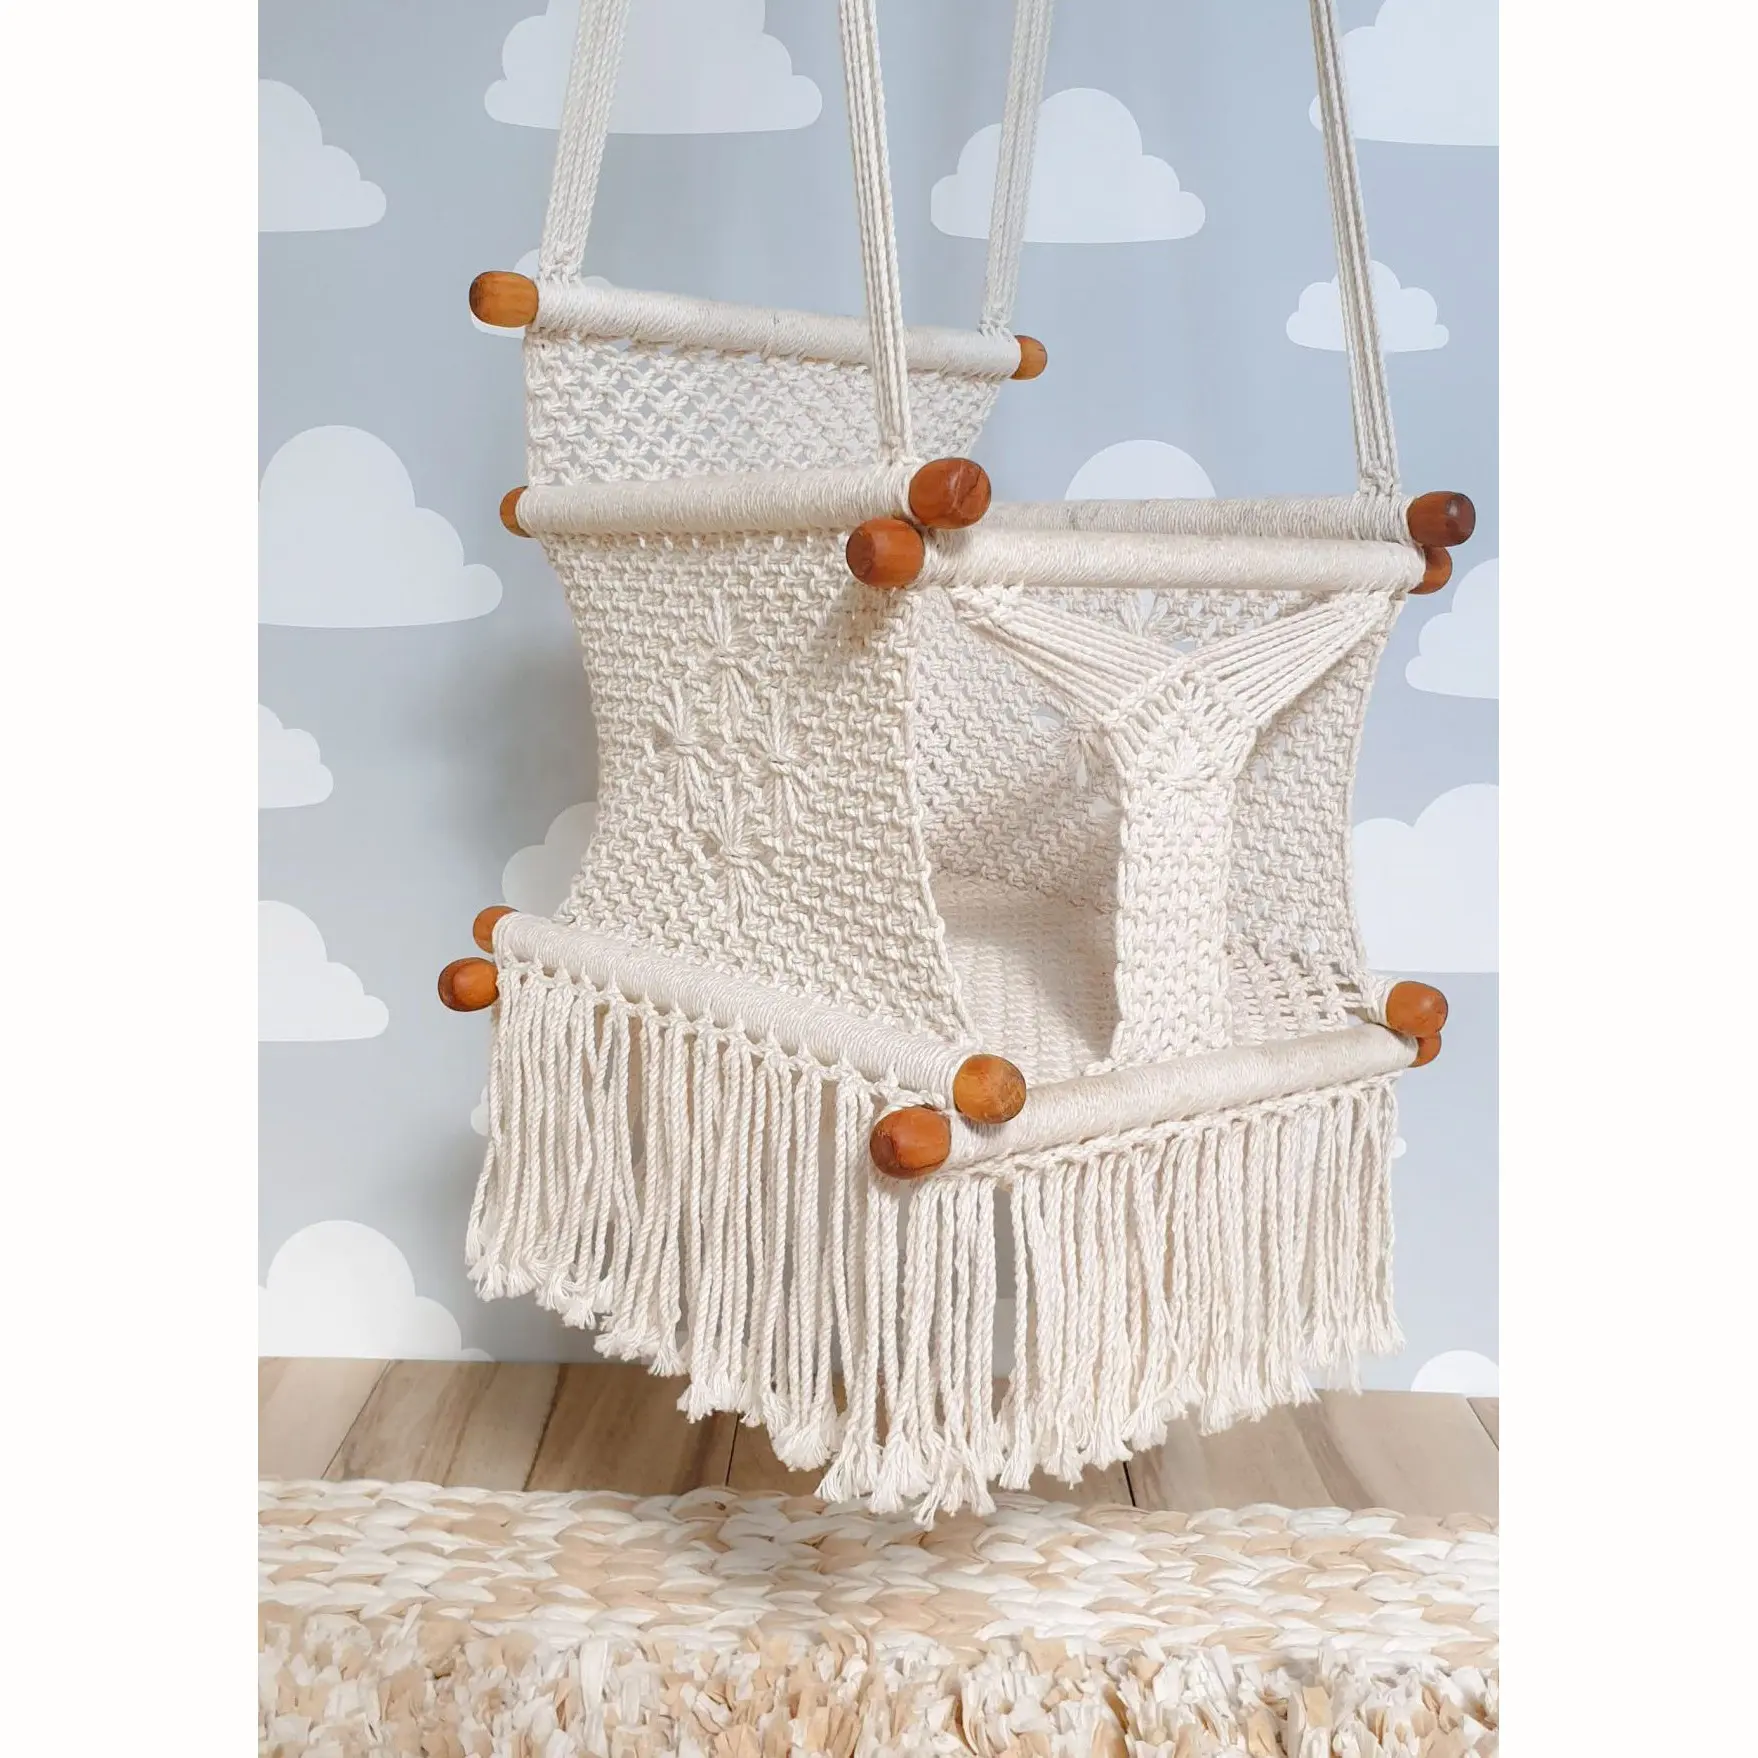 Manufacture Beautiful DIY handcrafted cotton macrame swinging chairs for kids made in Vietnam